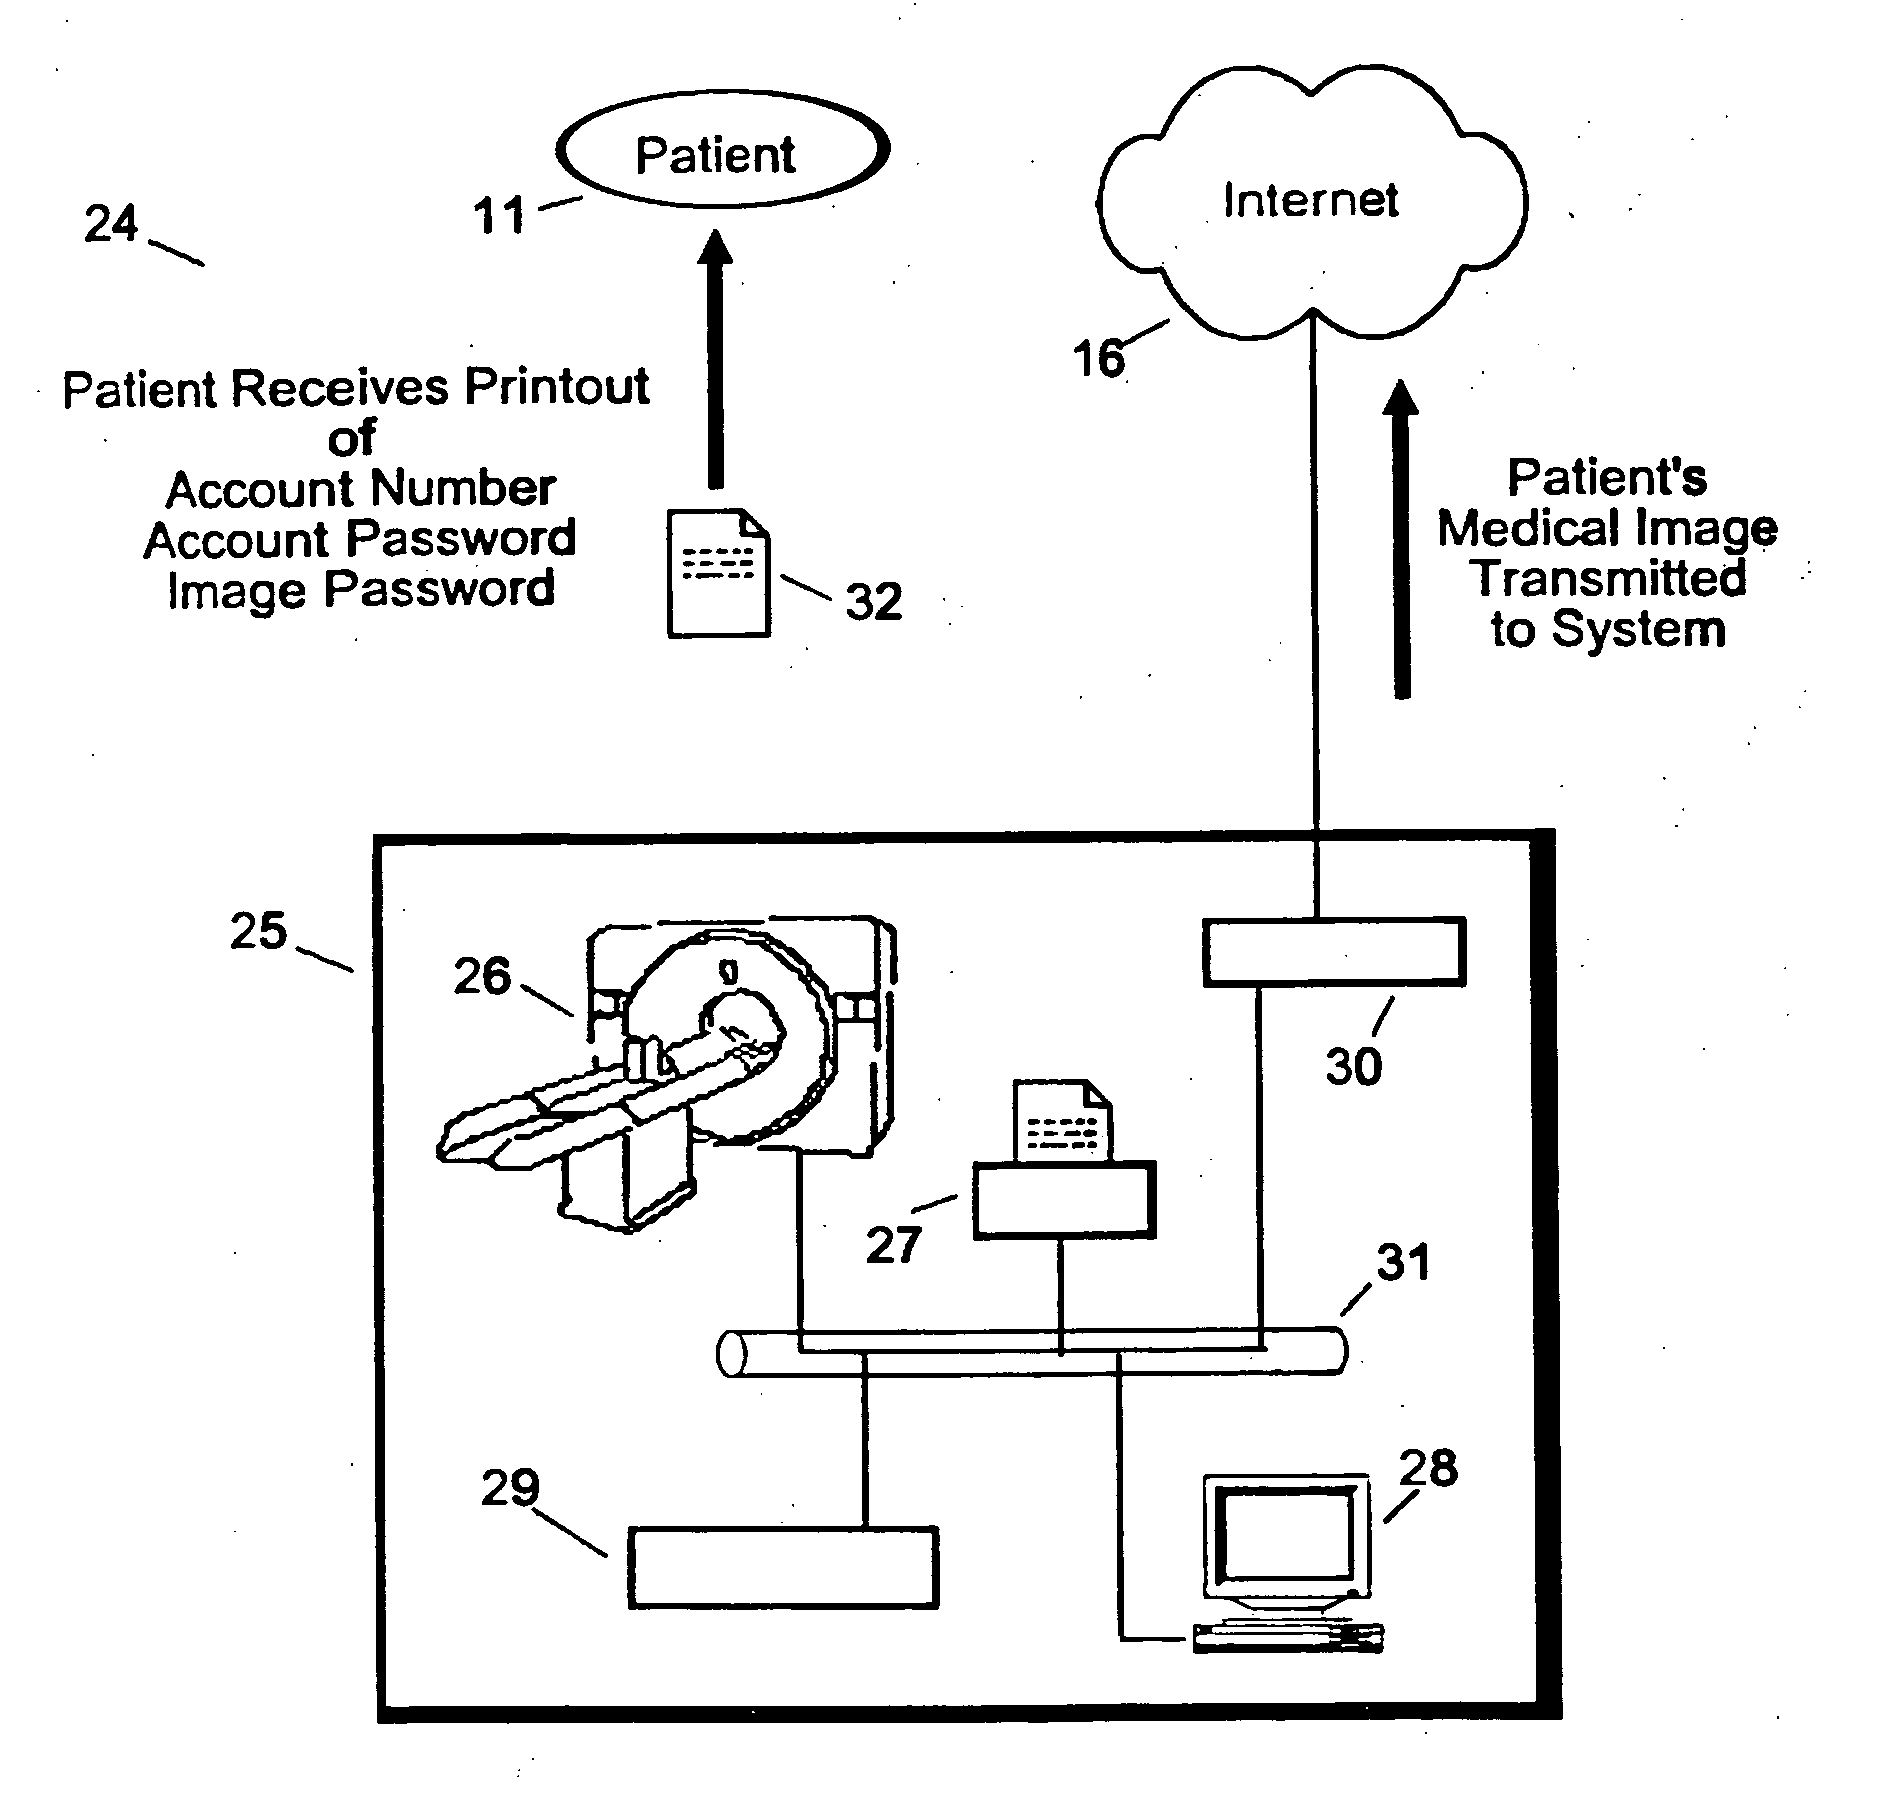 System and method for patient directed digital medical image transmittal device